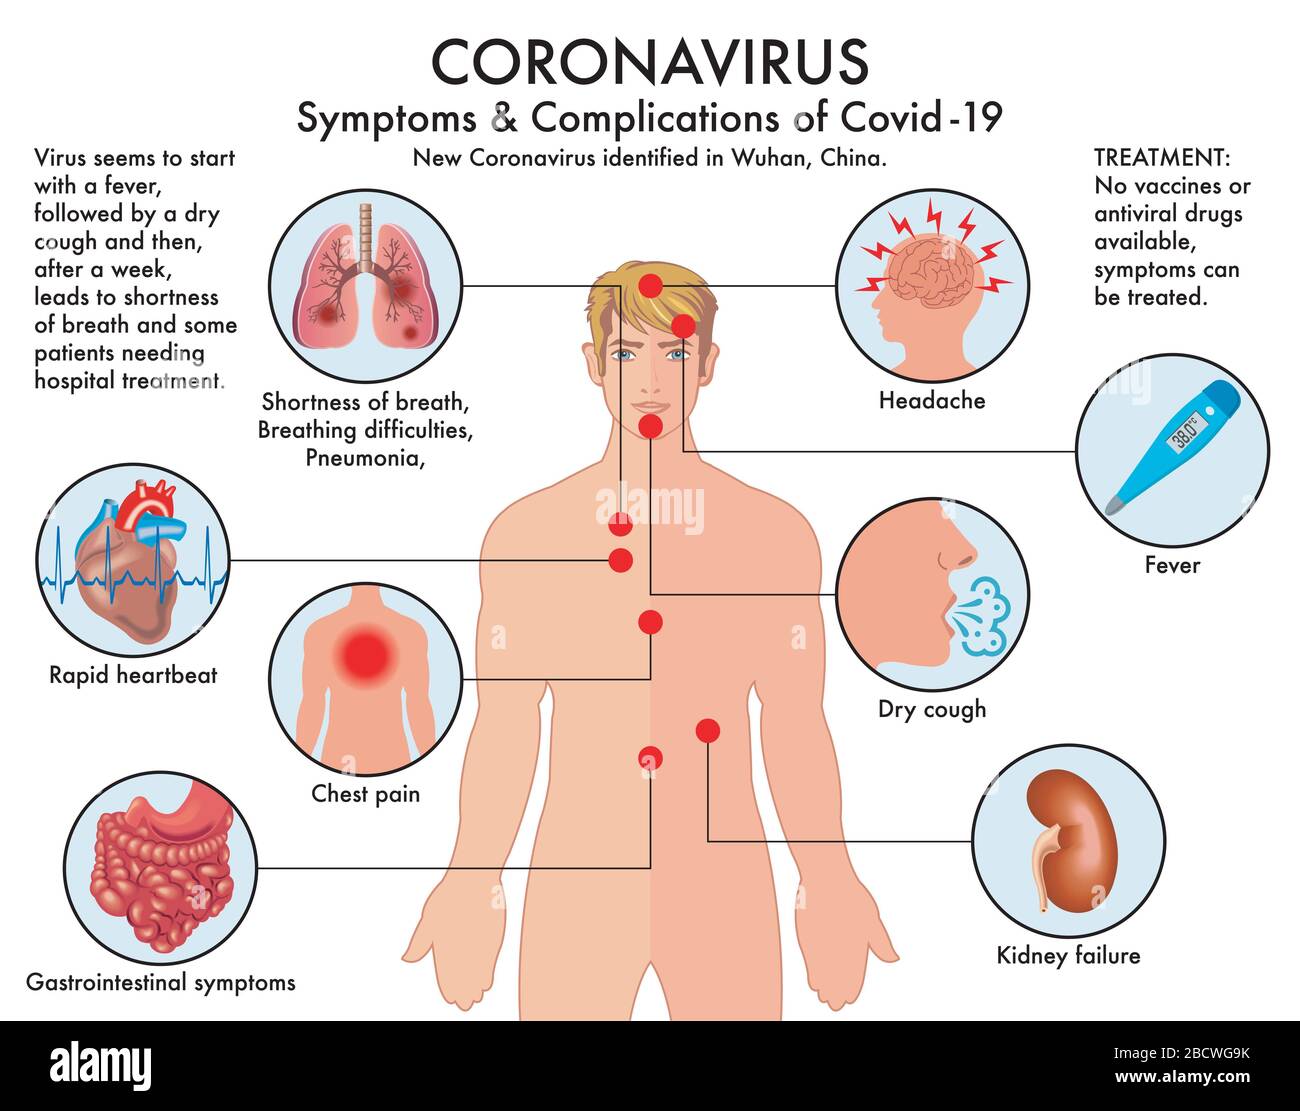 Chart of symptoms and complications of Coronavirus (Covid-19) with annotations. Stock Photo